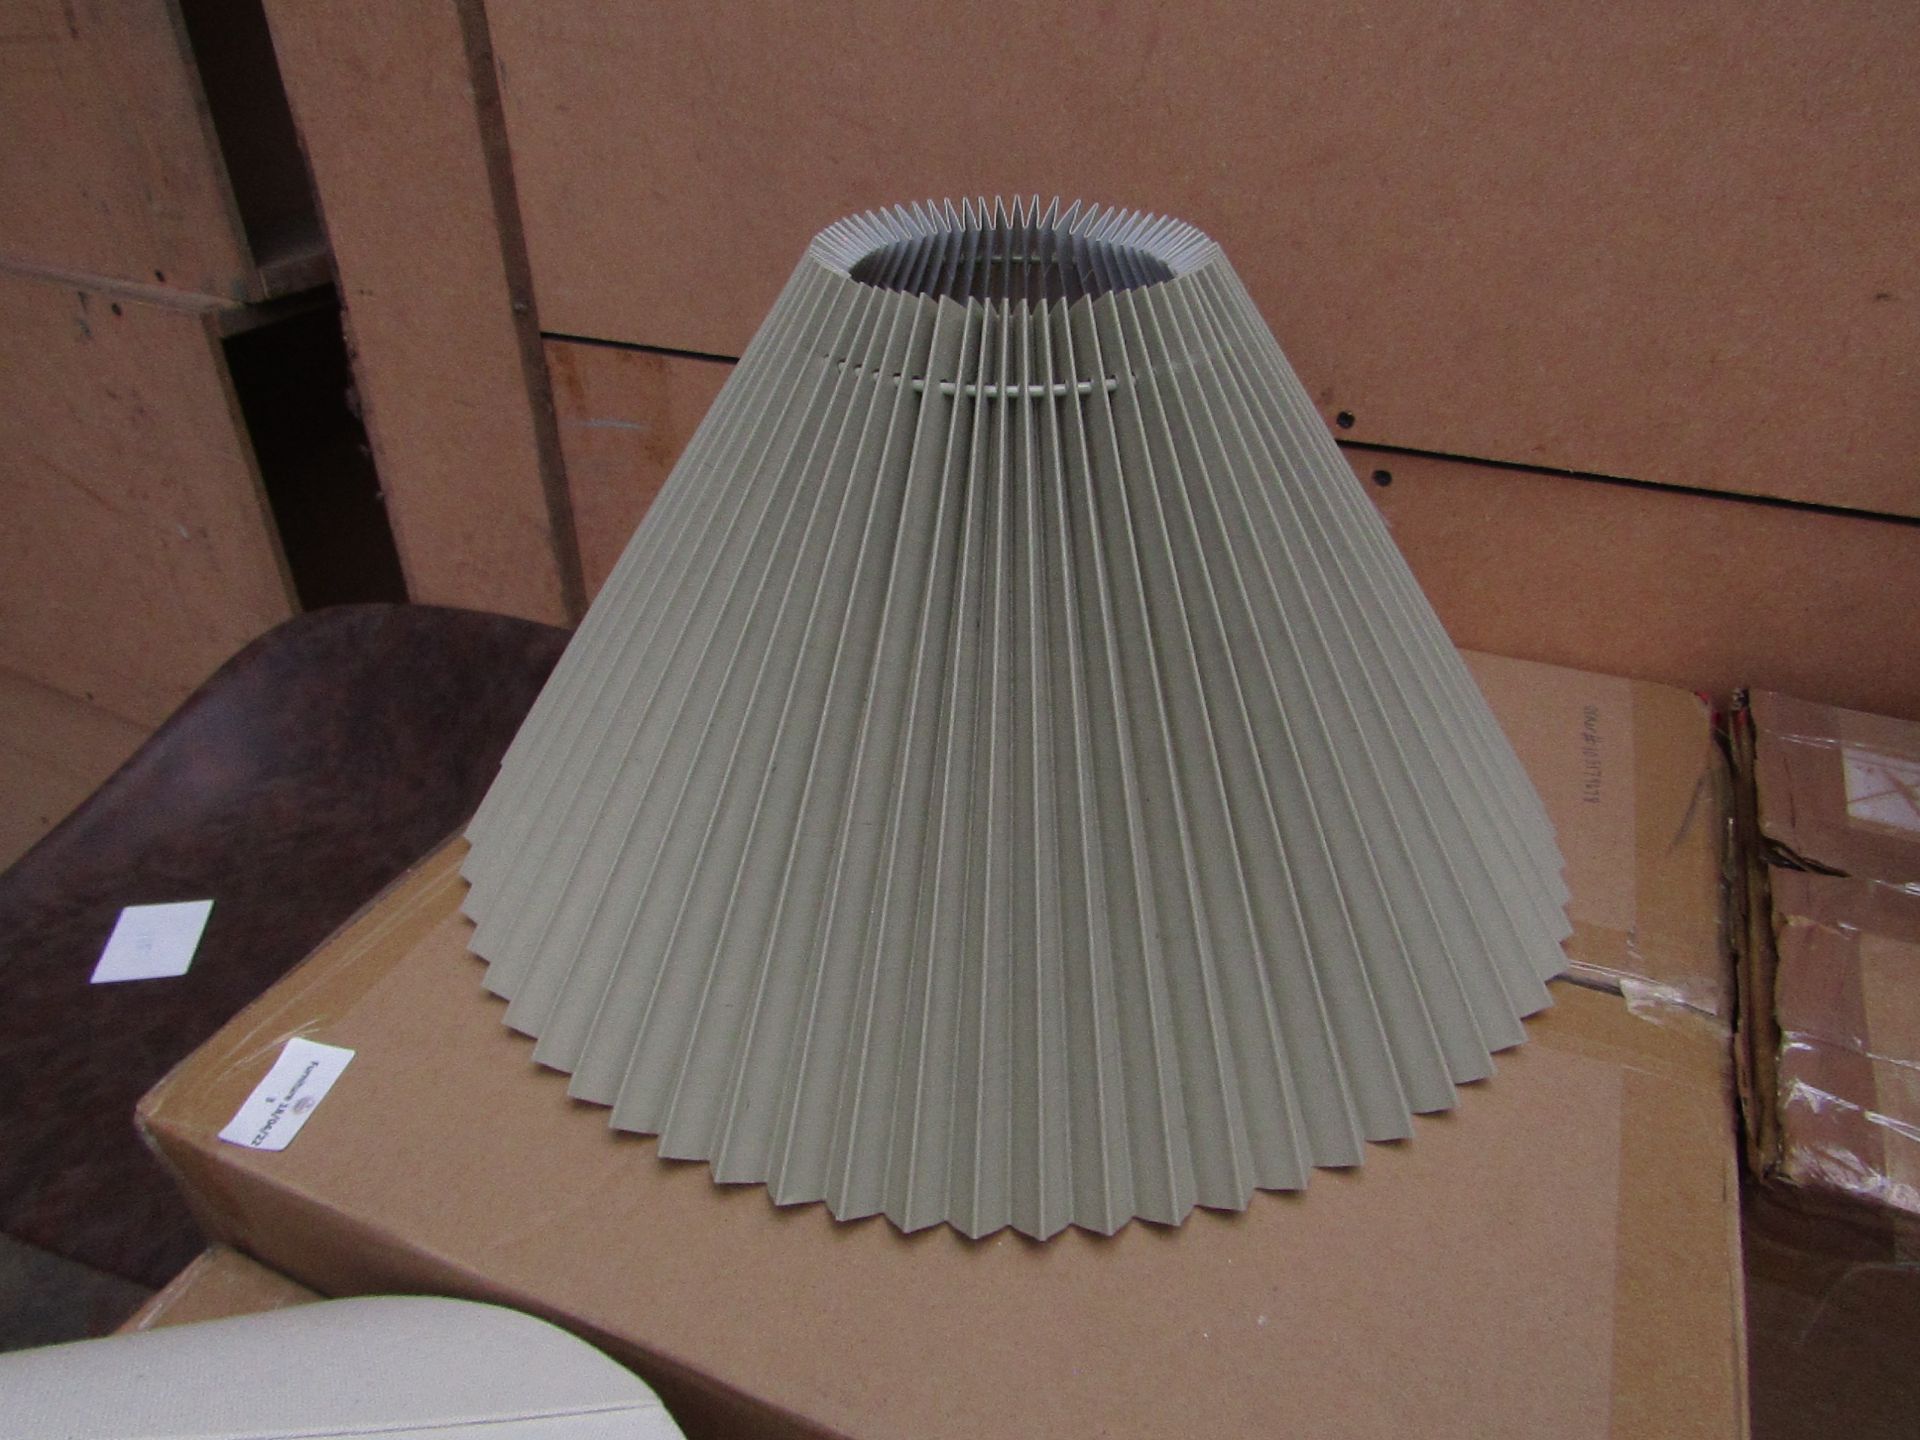 | 1X | MADE.COM PLEAT LAMP SHADE, 40CM, PEAR GREEN | UNCHECKED & BOXED | RRP £38 |